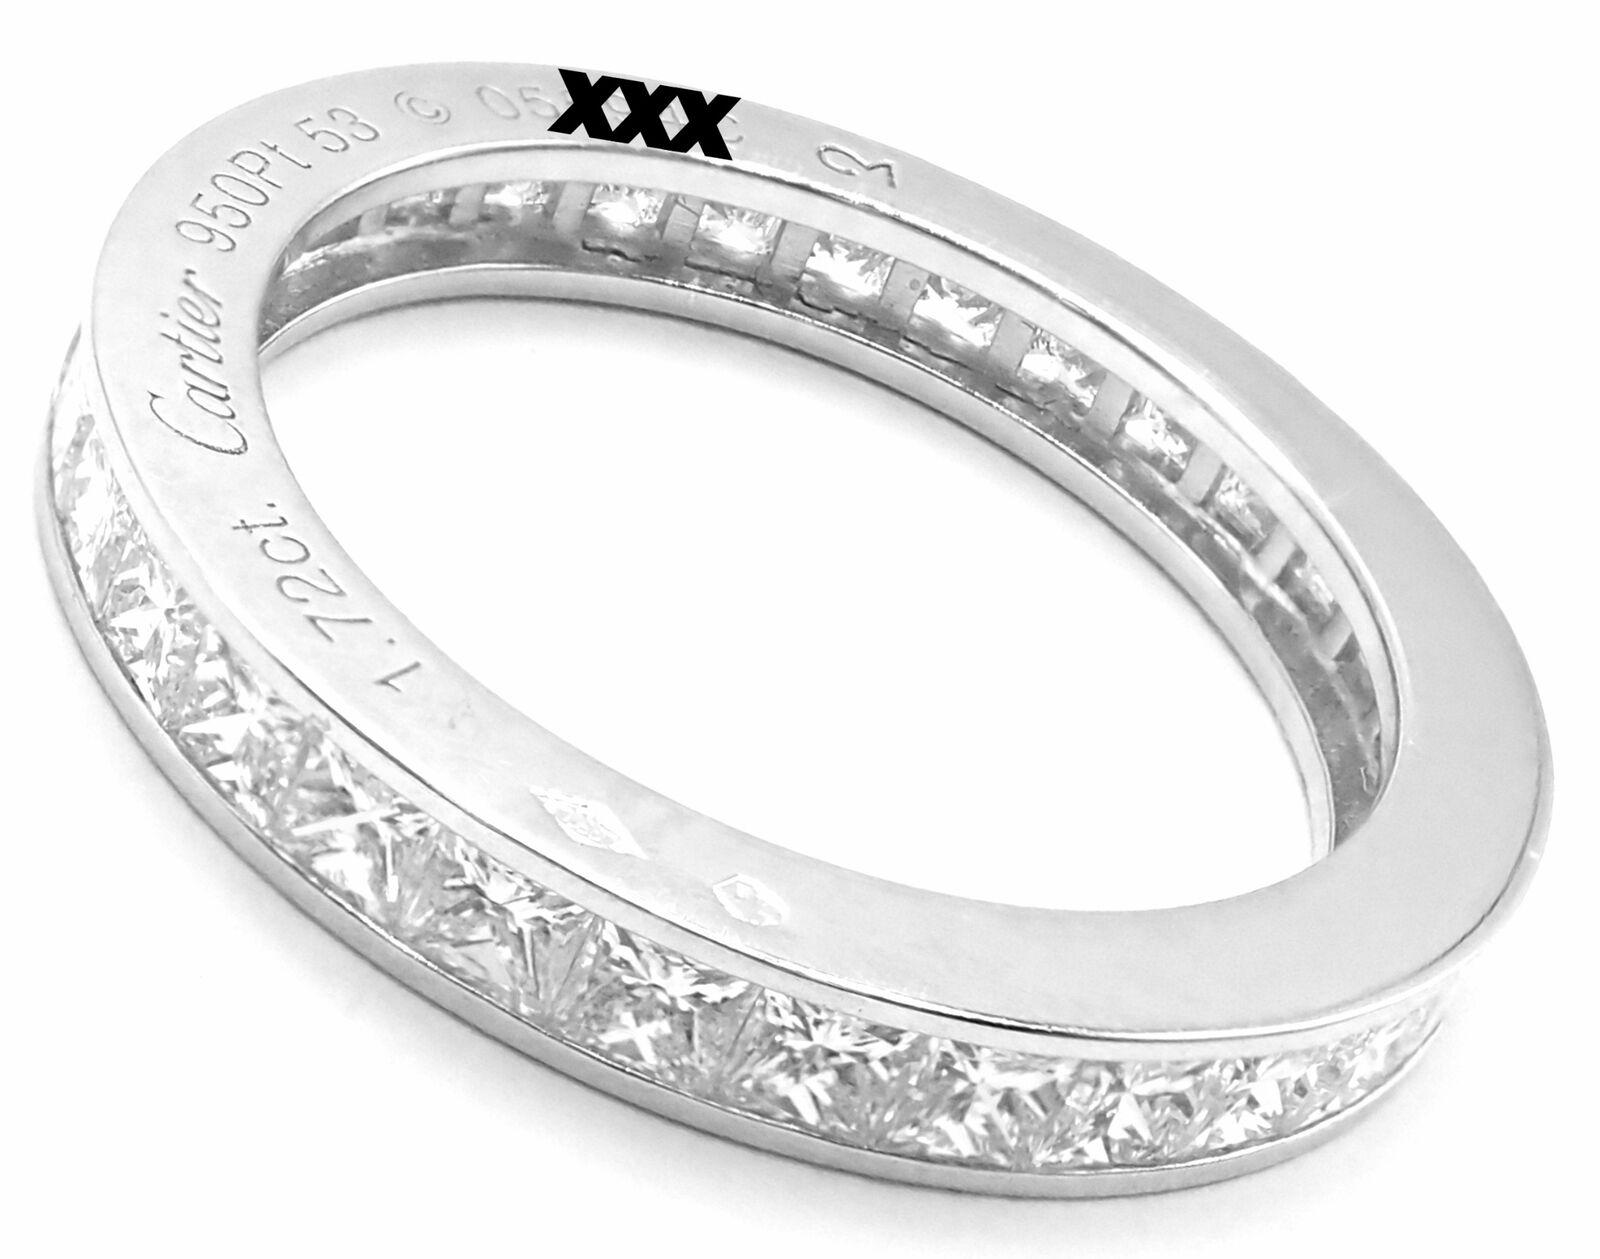 Platinum Princess Cut Diamond Eternity Band Ring by Cartier.
With 32 round brilliant cut diamonds VVS1 clarity, E color total weight approximately 1.72ct 
This ring comes with Cartier box and a Cartier service paper.
Details:
Ring Size: European 53,